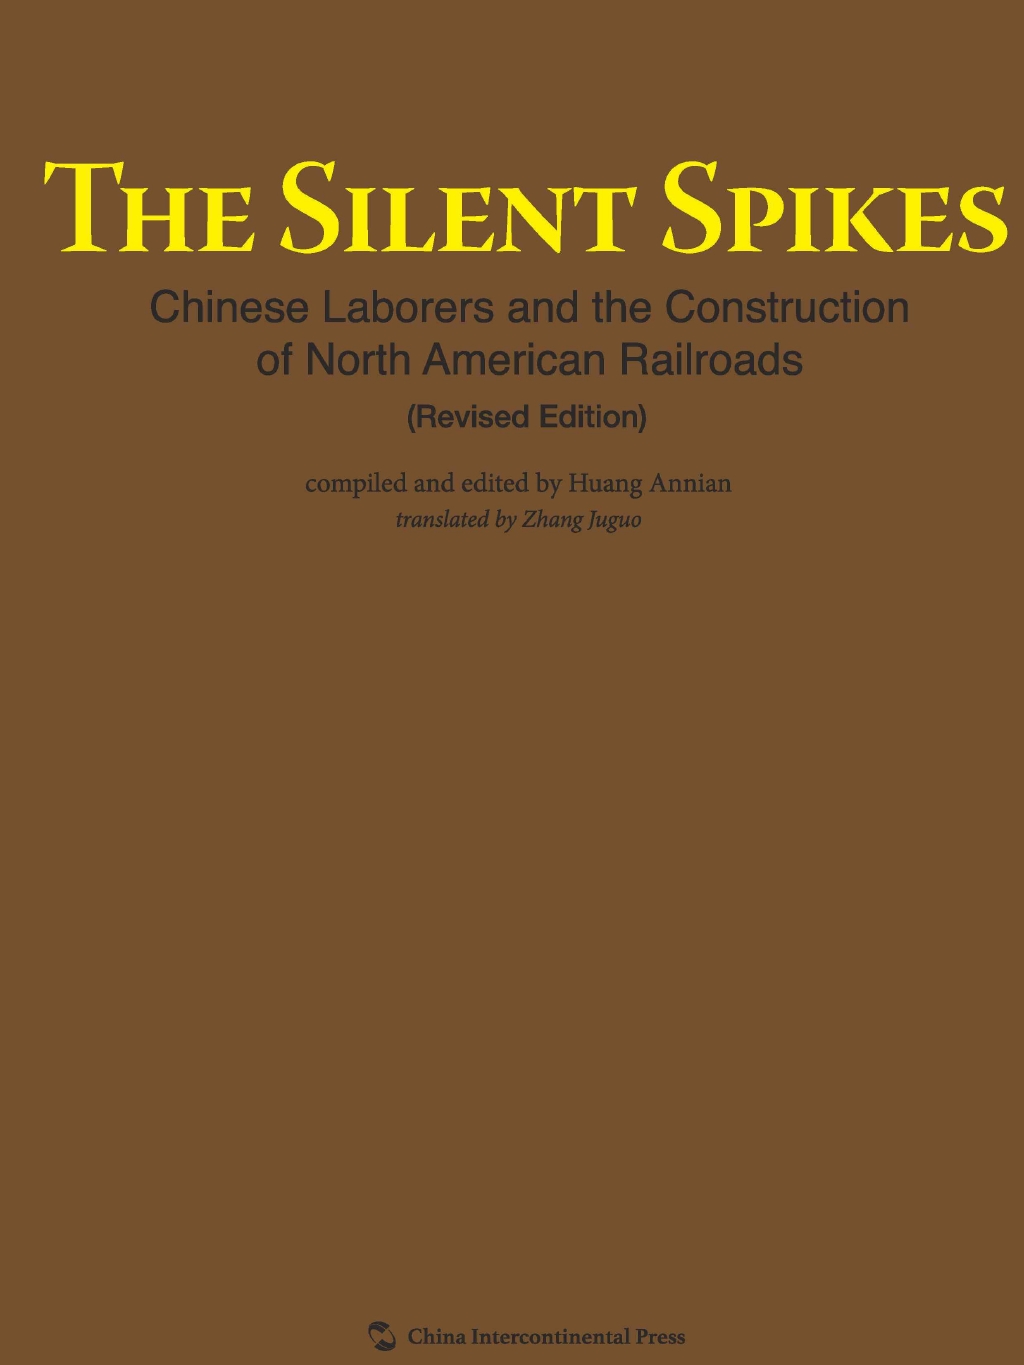 The Silent Spikes